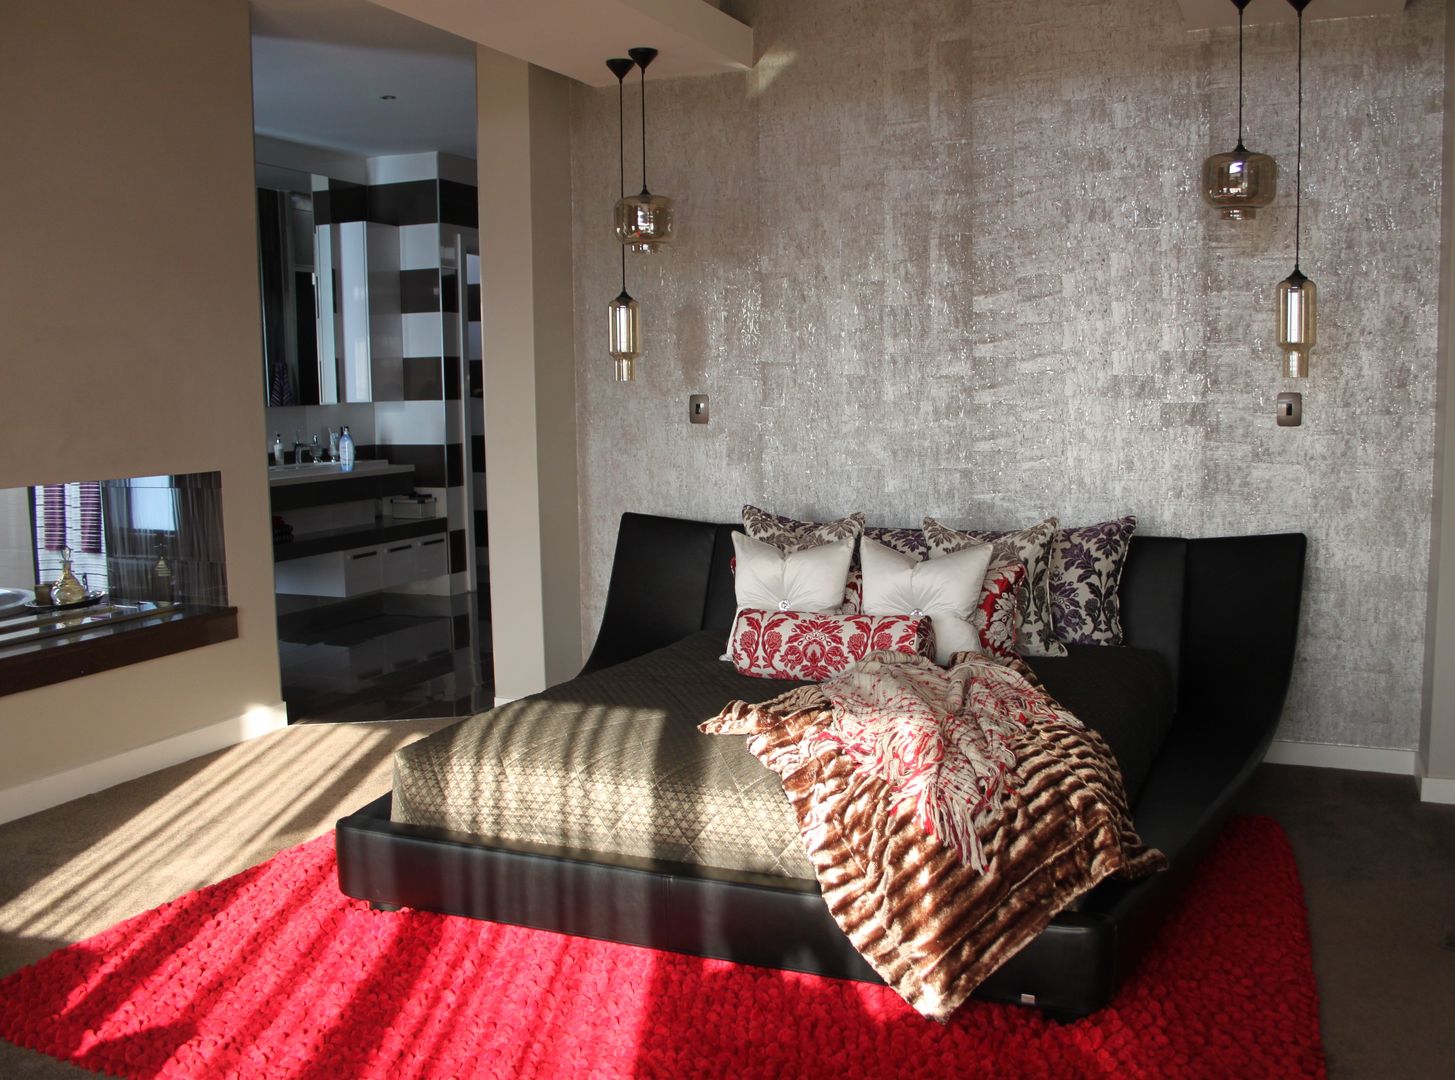 Main Bedroom Inside Out Interiors Modern style bedroom modern,low-slung bed,leather bed,main bedroom,fur throw,textured carpet,fitted quilt,wallpaper,pendant lights,scatter cushions